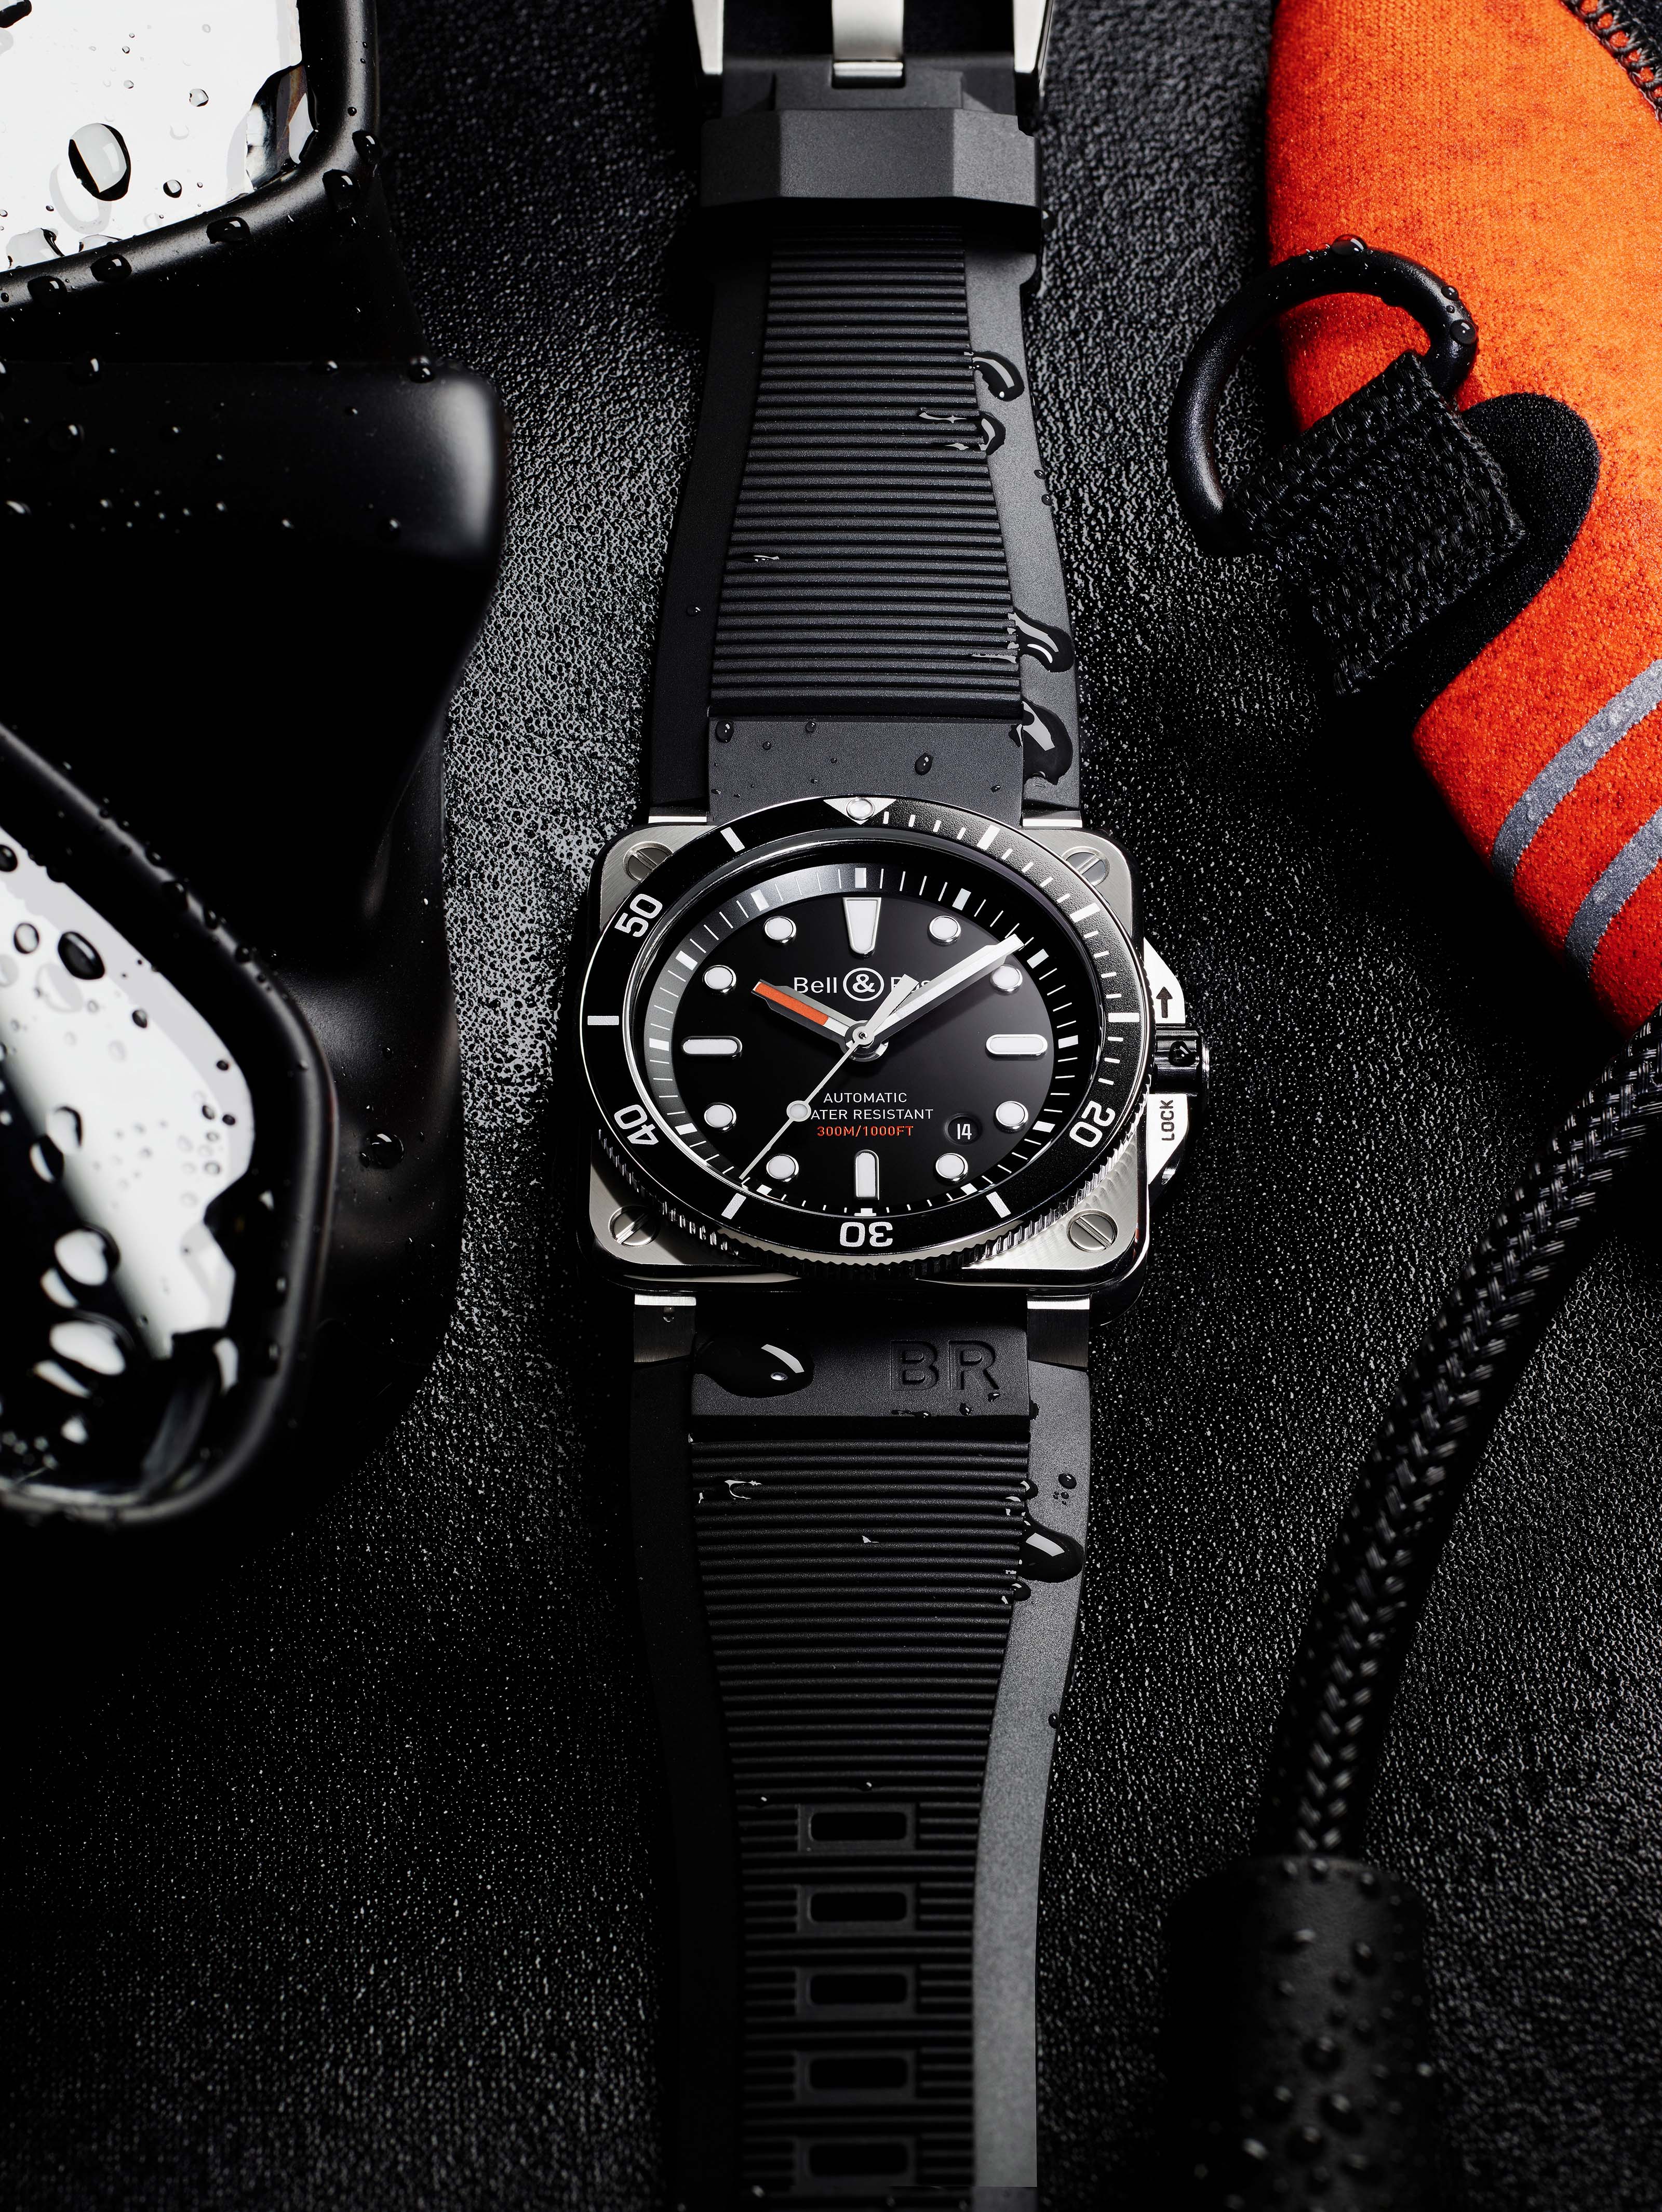 bell and ross diver 300